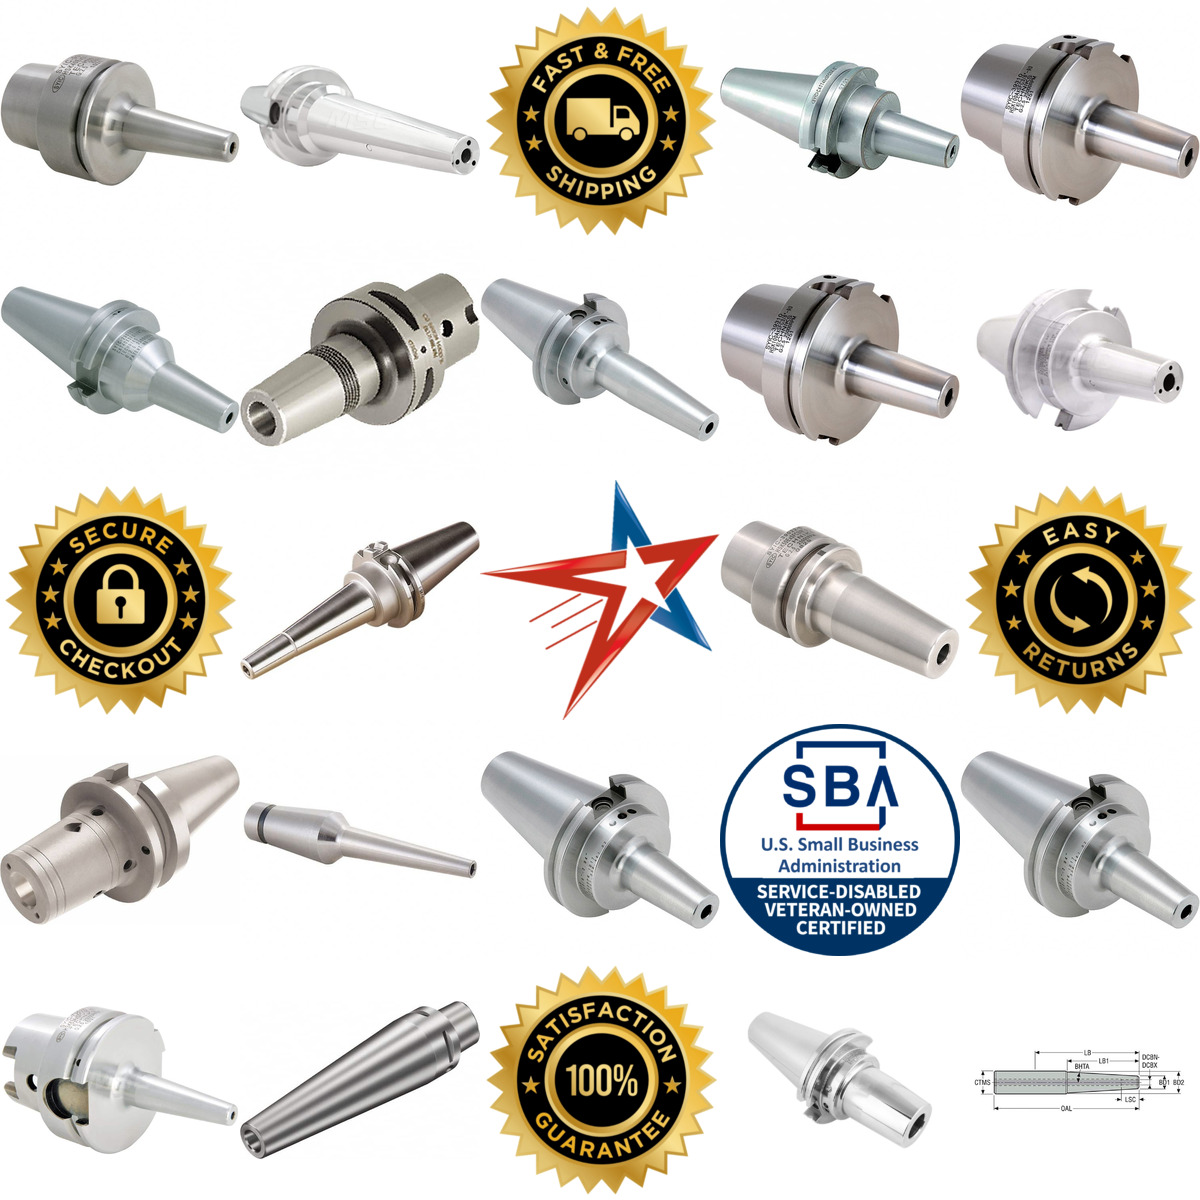 A selection of End Mill Holders and Adapters products on GoVets